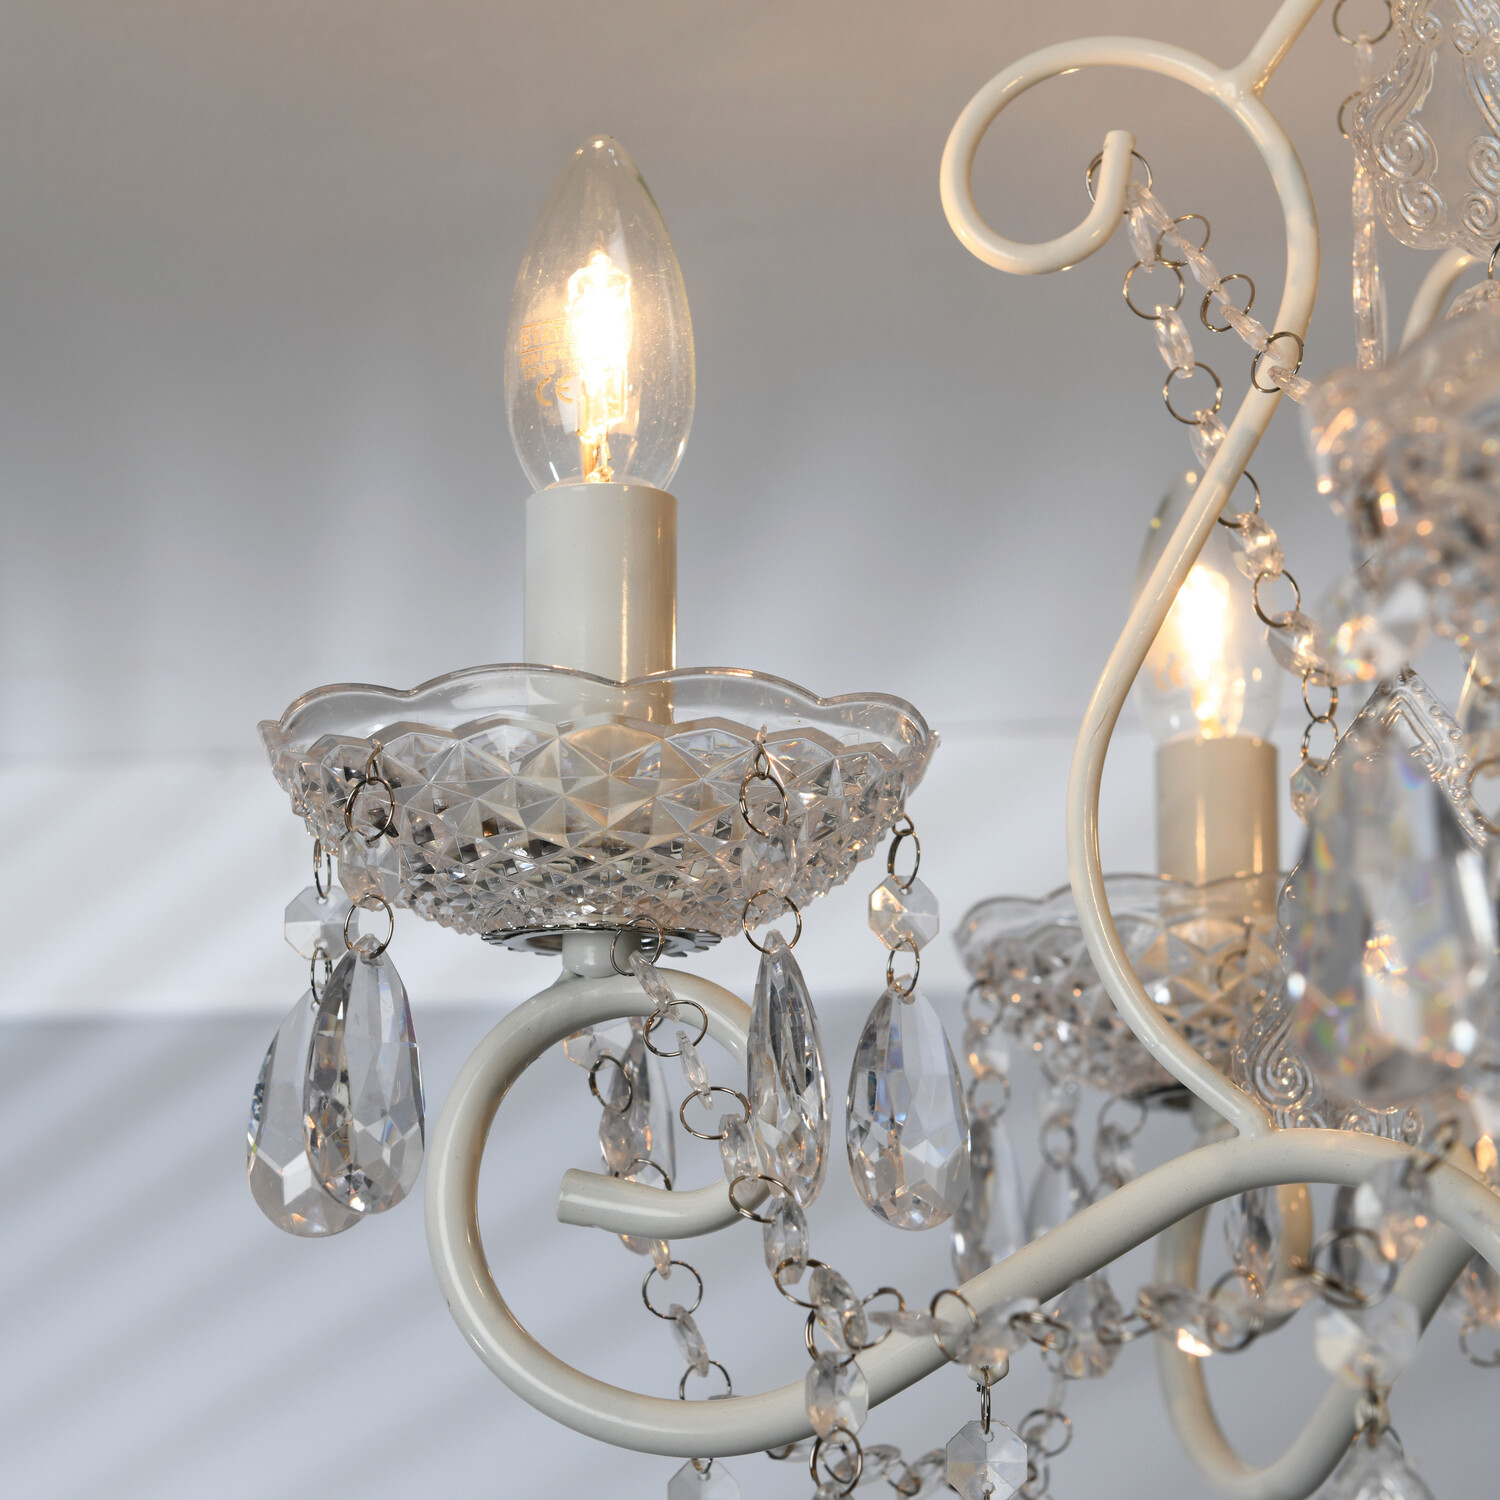 White Antiqued Jewelled Ceiling Chandelier Image 6